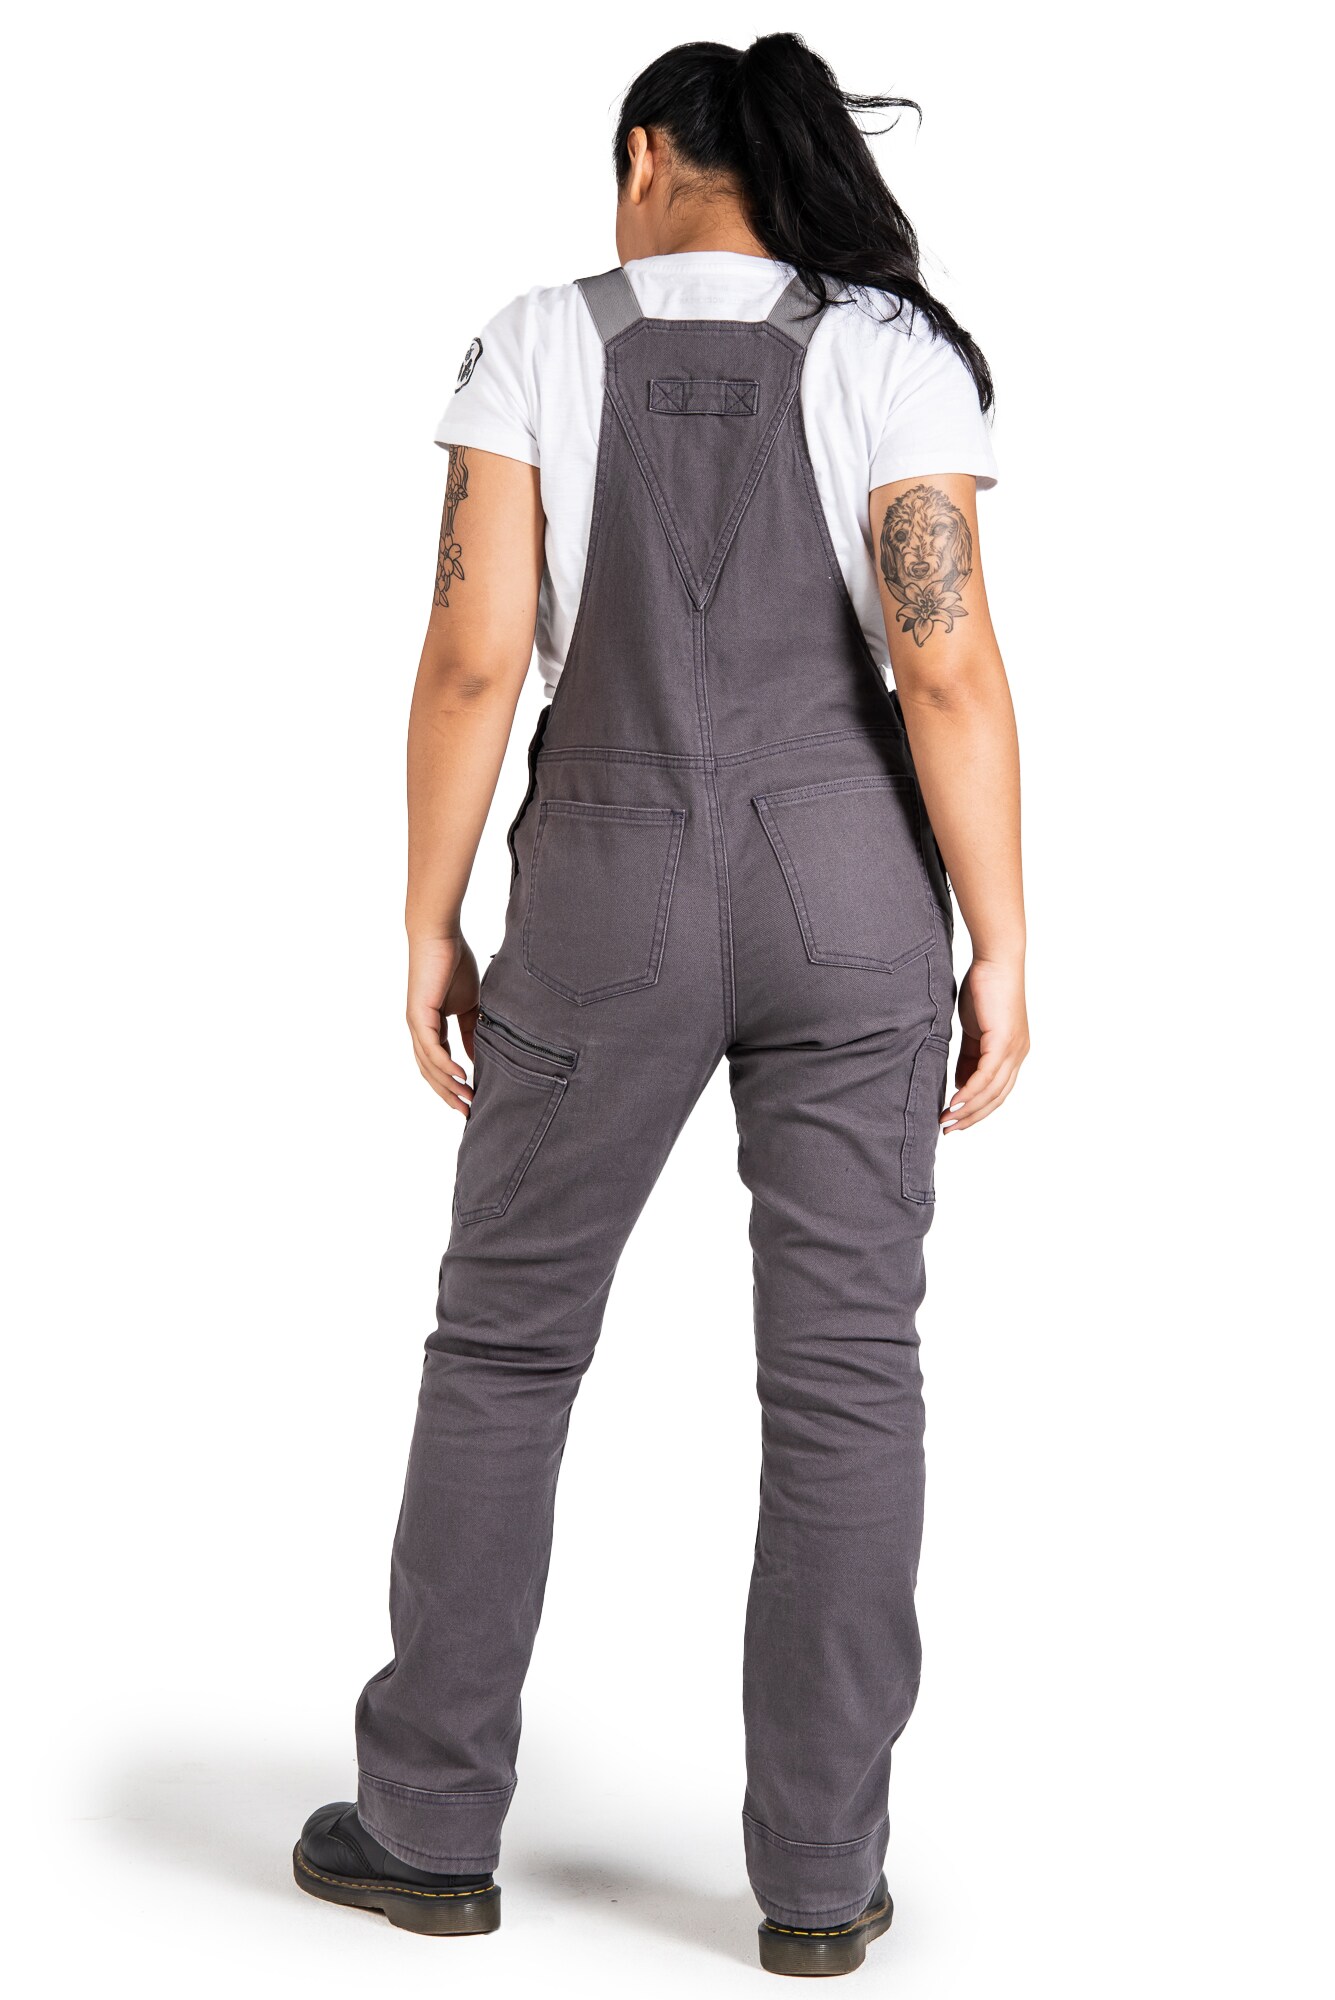 Dovetail Workwear Women's Dark Grey Canvas Overall in the Coveralls ...